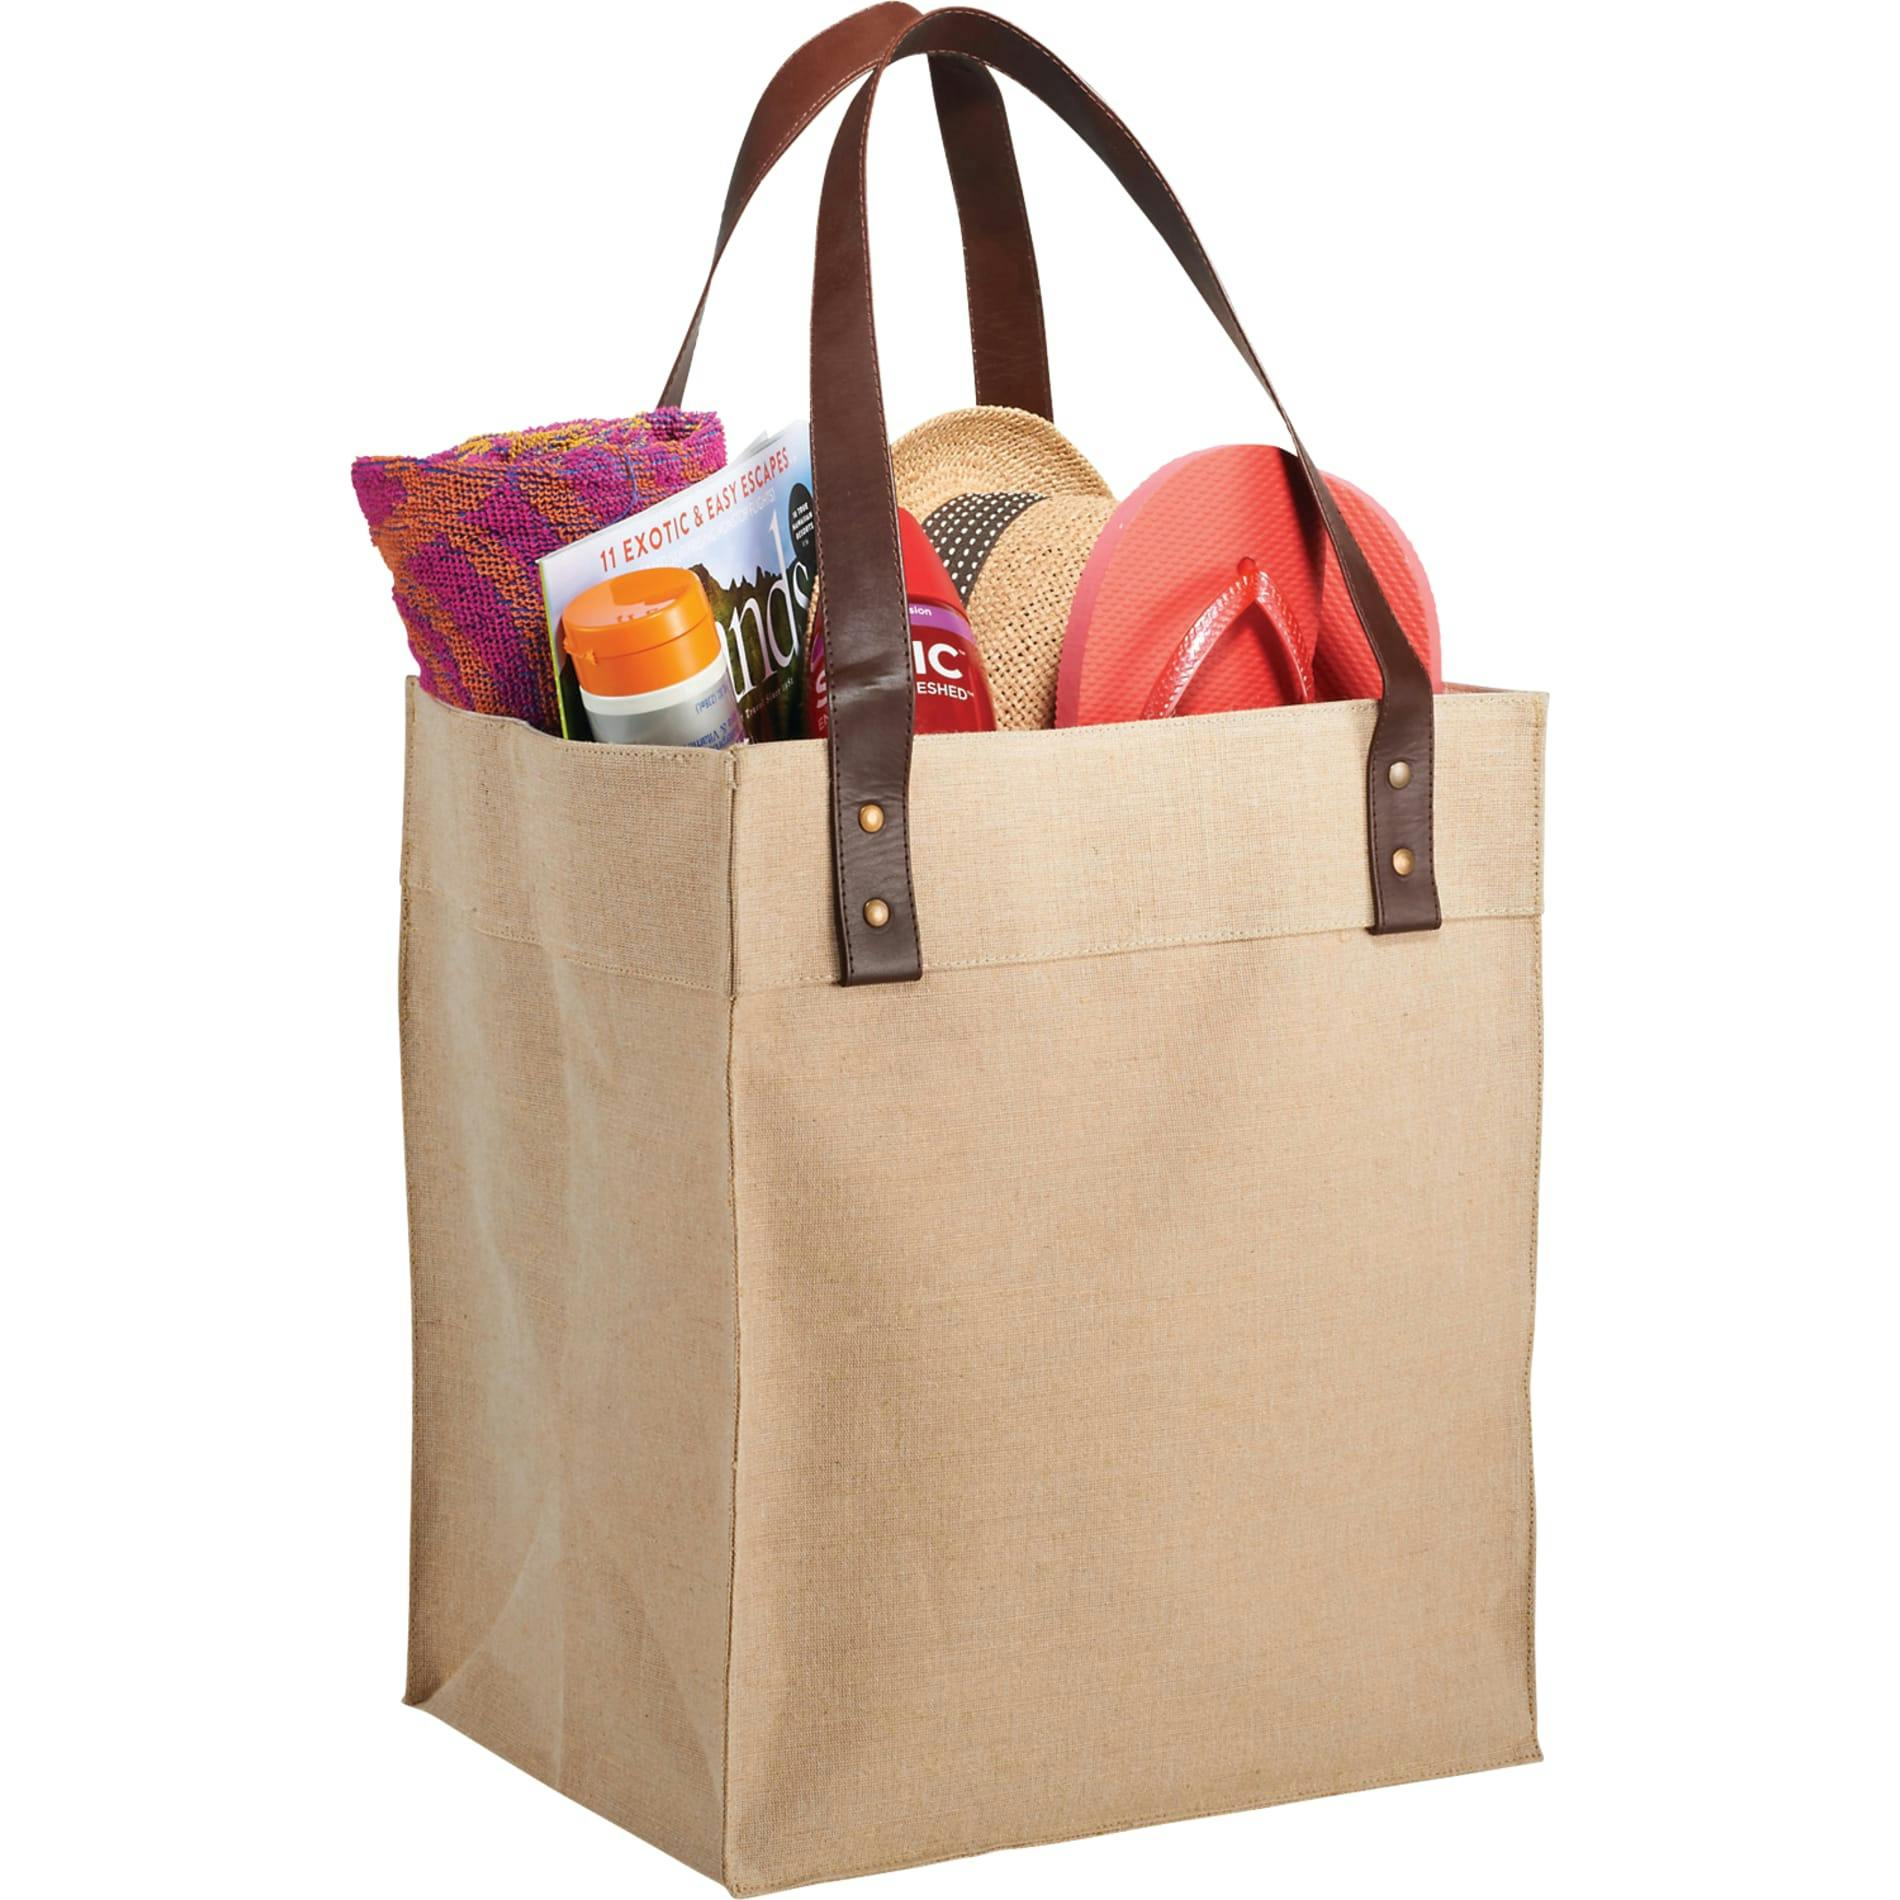 Westover Premium Grocery Tote - additional Image 3